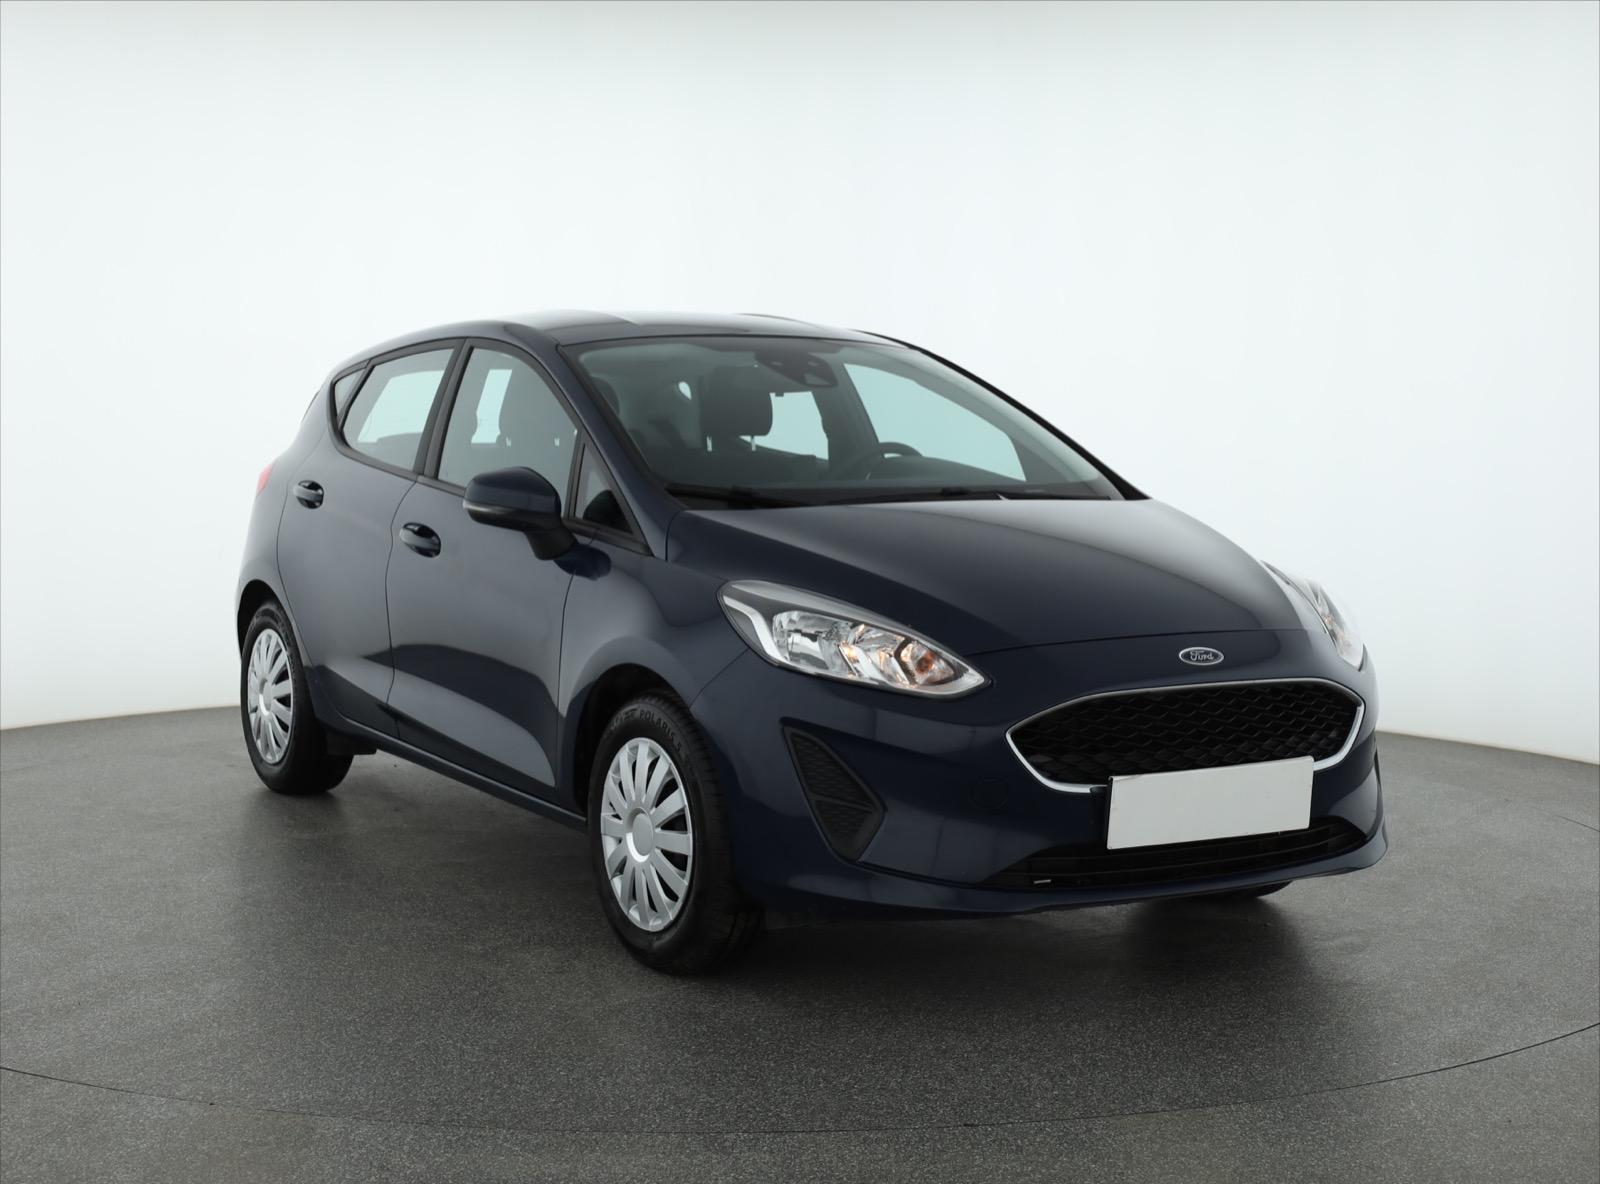 Ford Fiesta 1.1 Duratec Ti-VCT Hatchback 2019 - 1